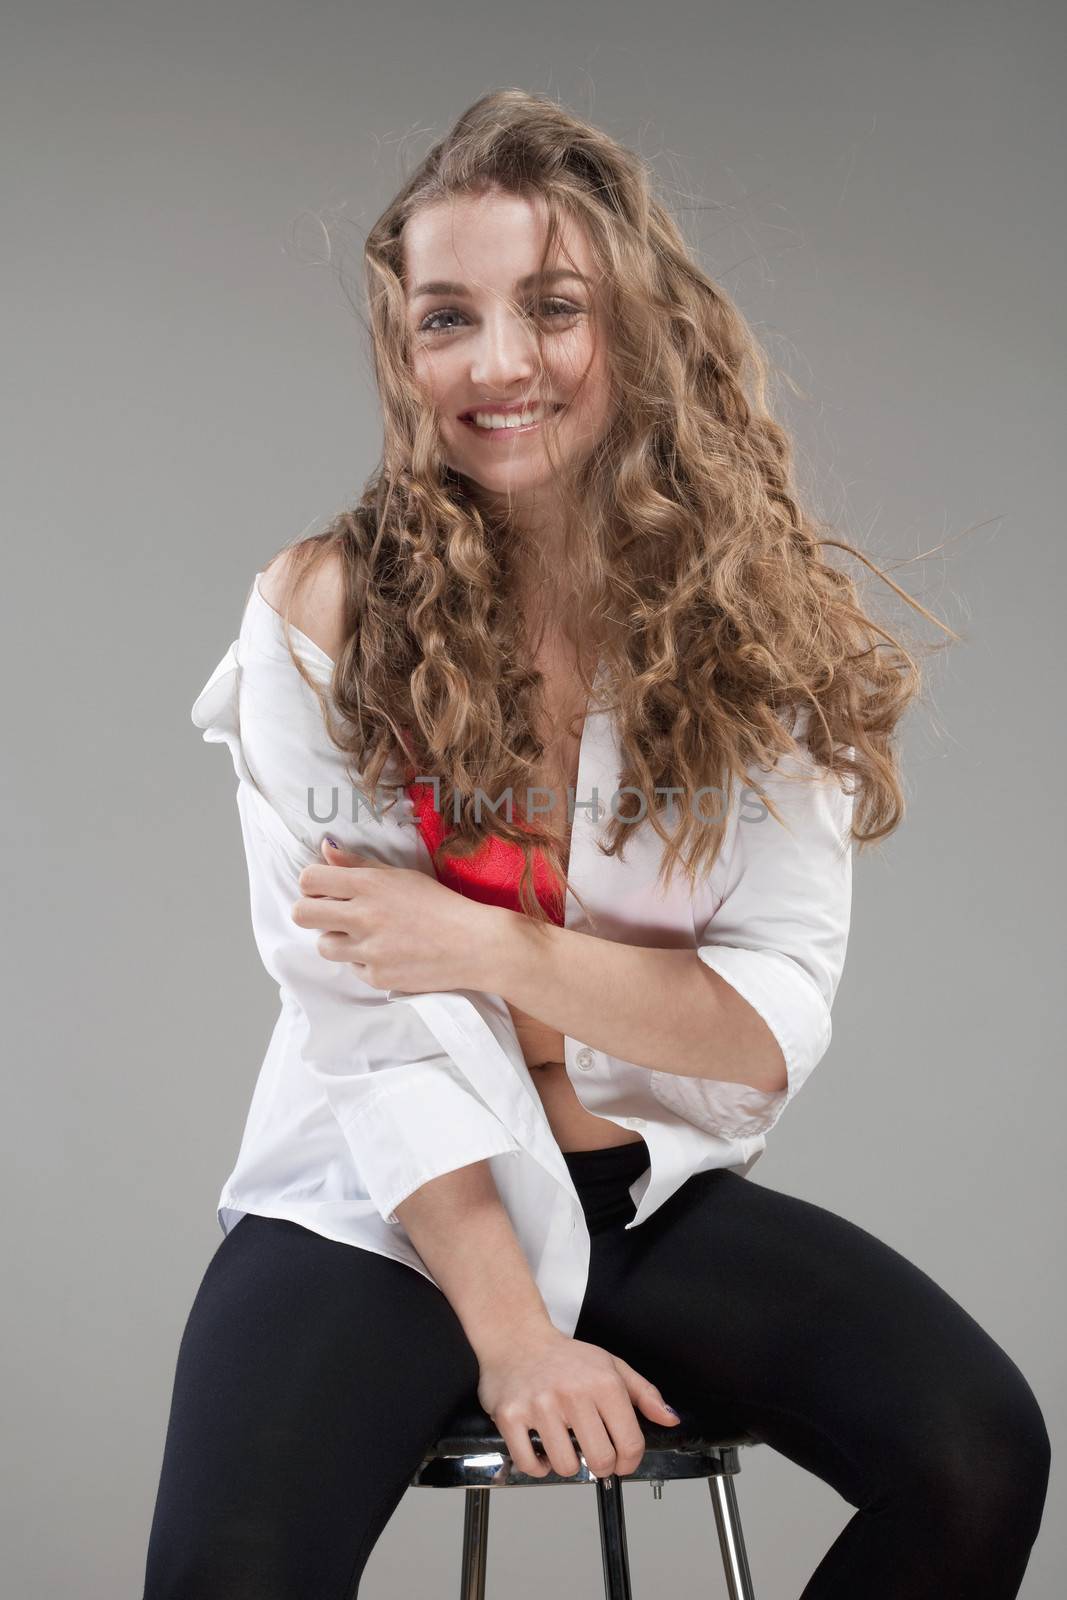 portrait of a young beautiful woman with brown hair smiling - isolated on gray